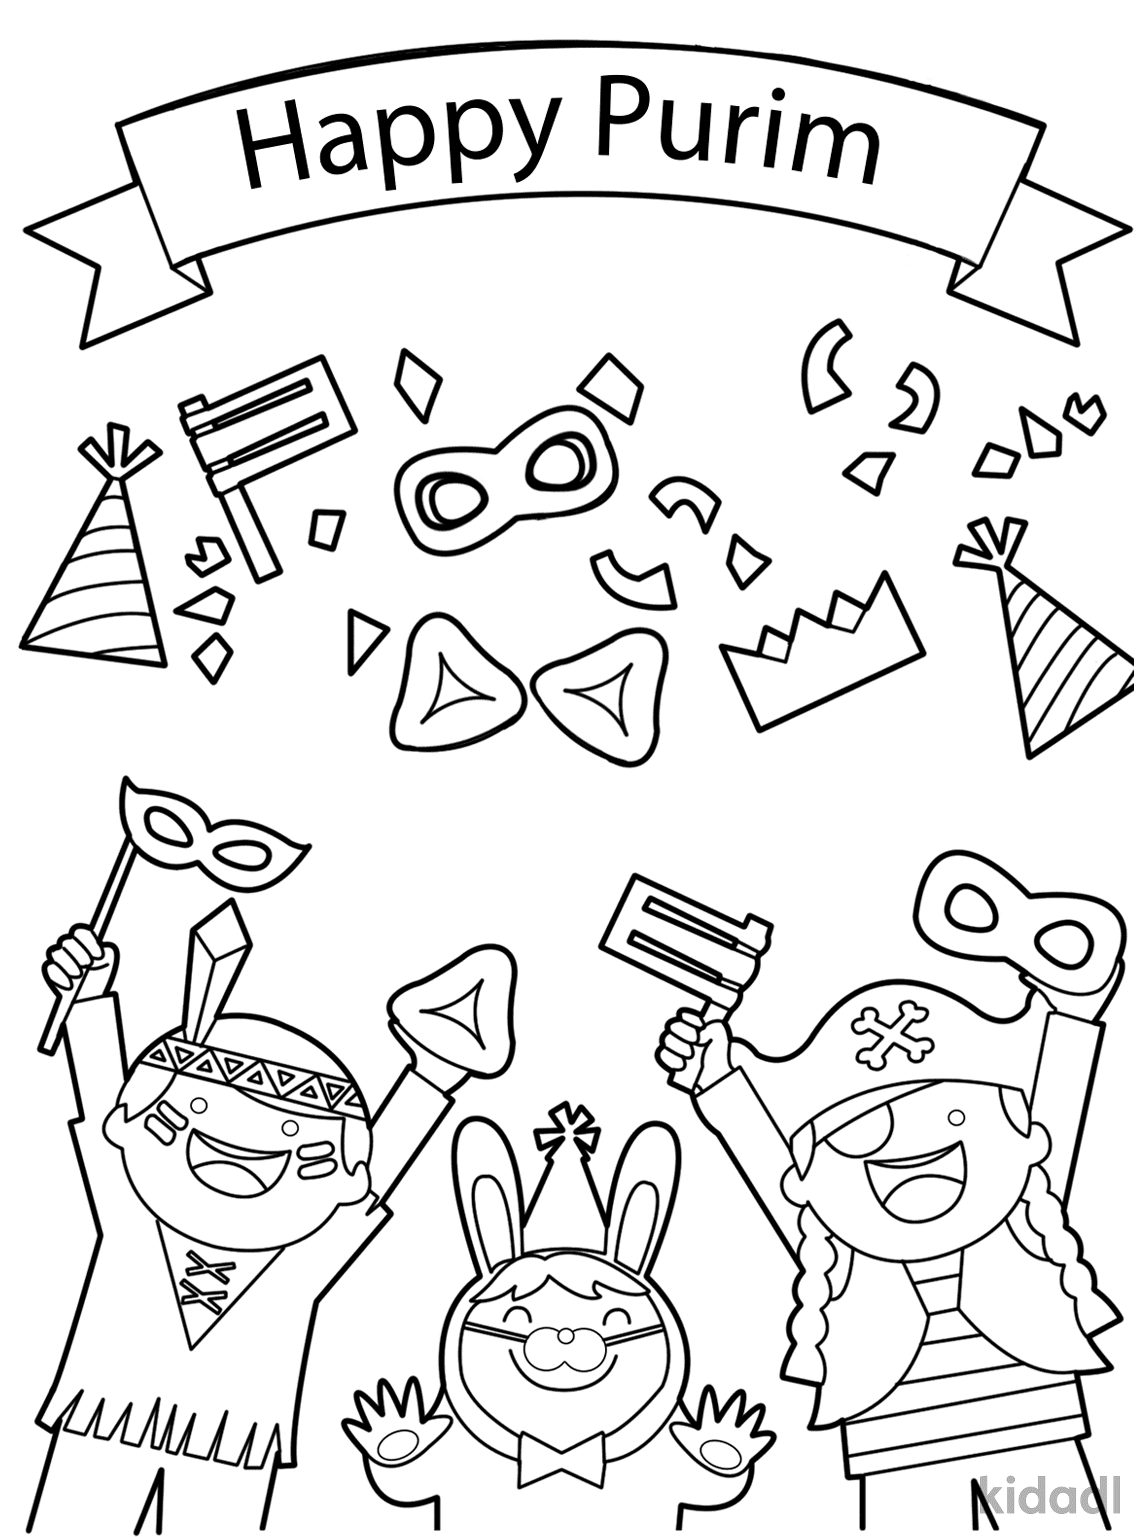 Happy Purim For Childrens Coloring Pages